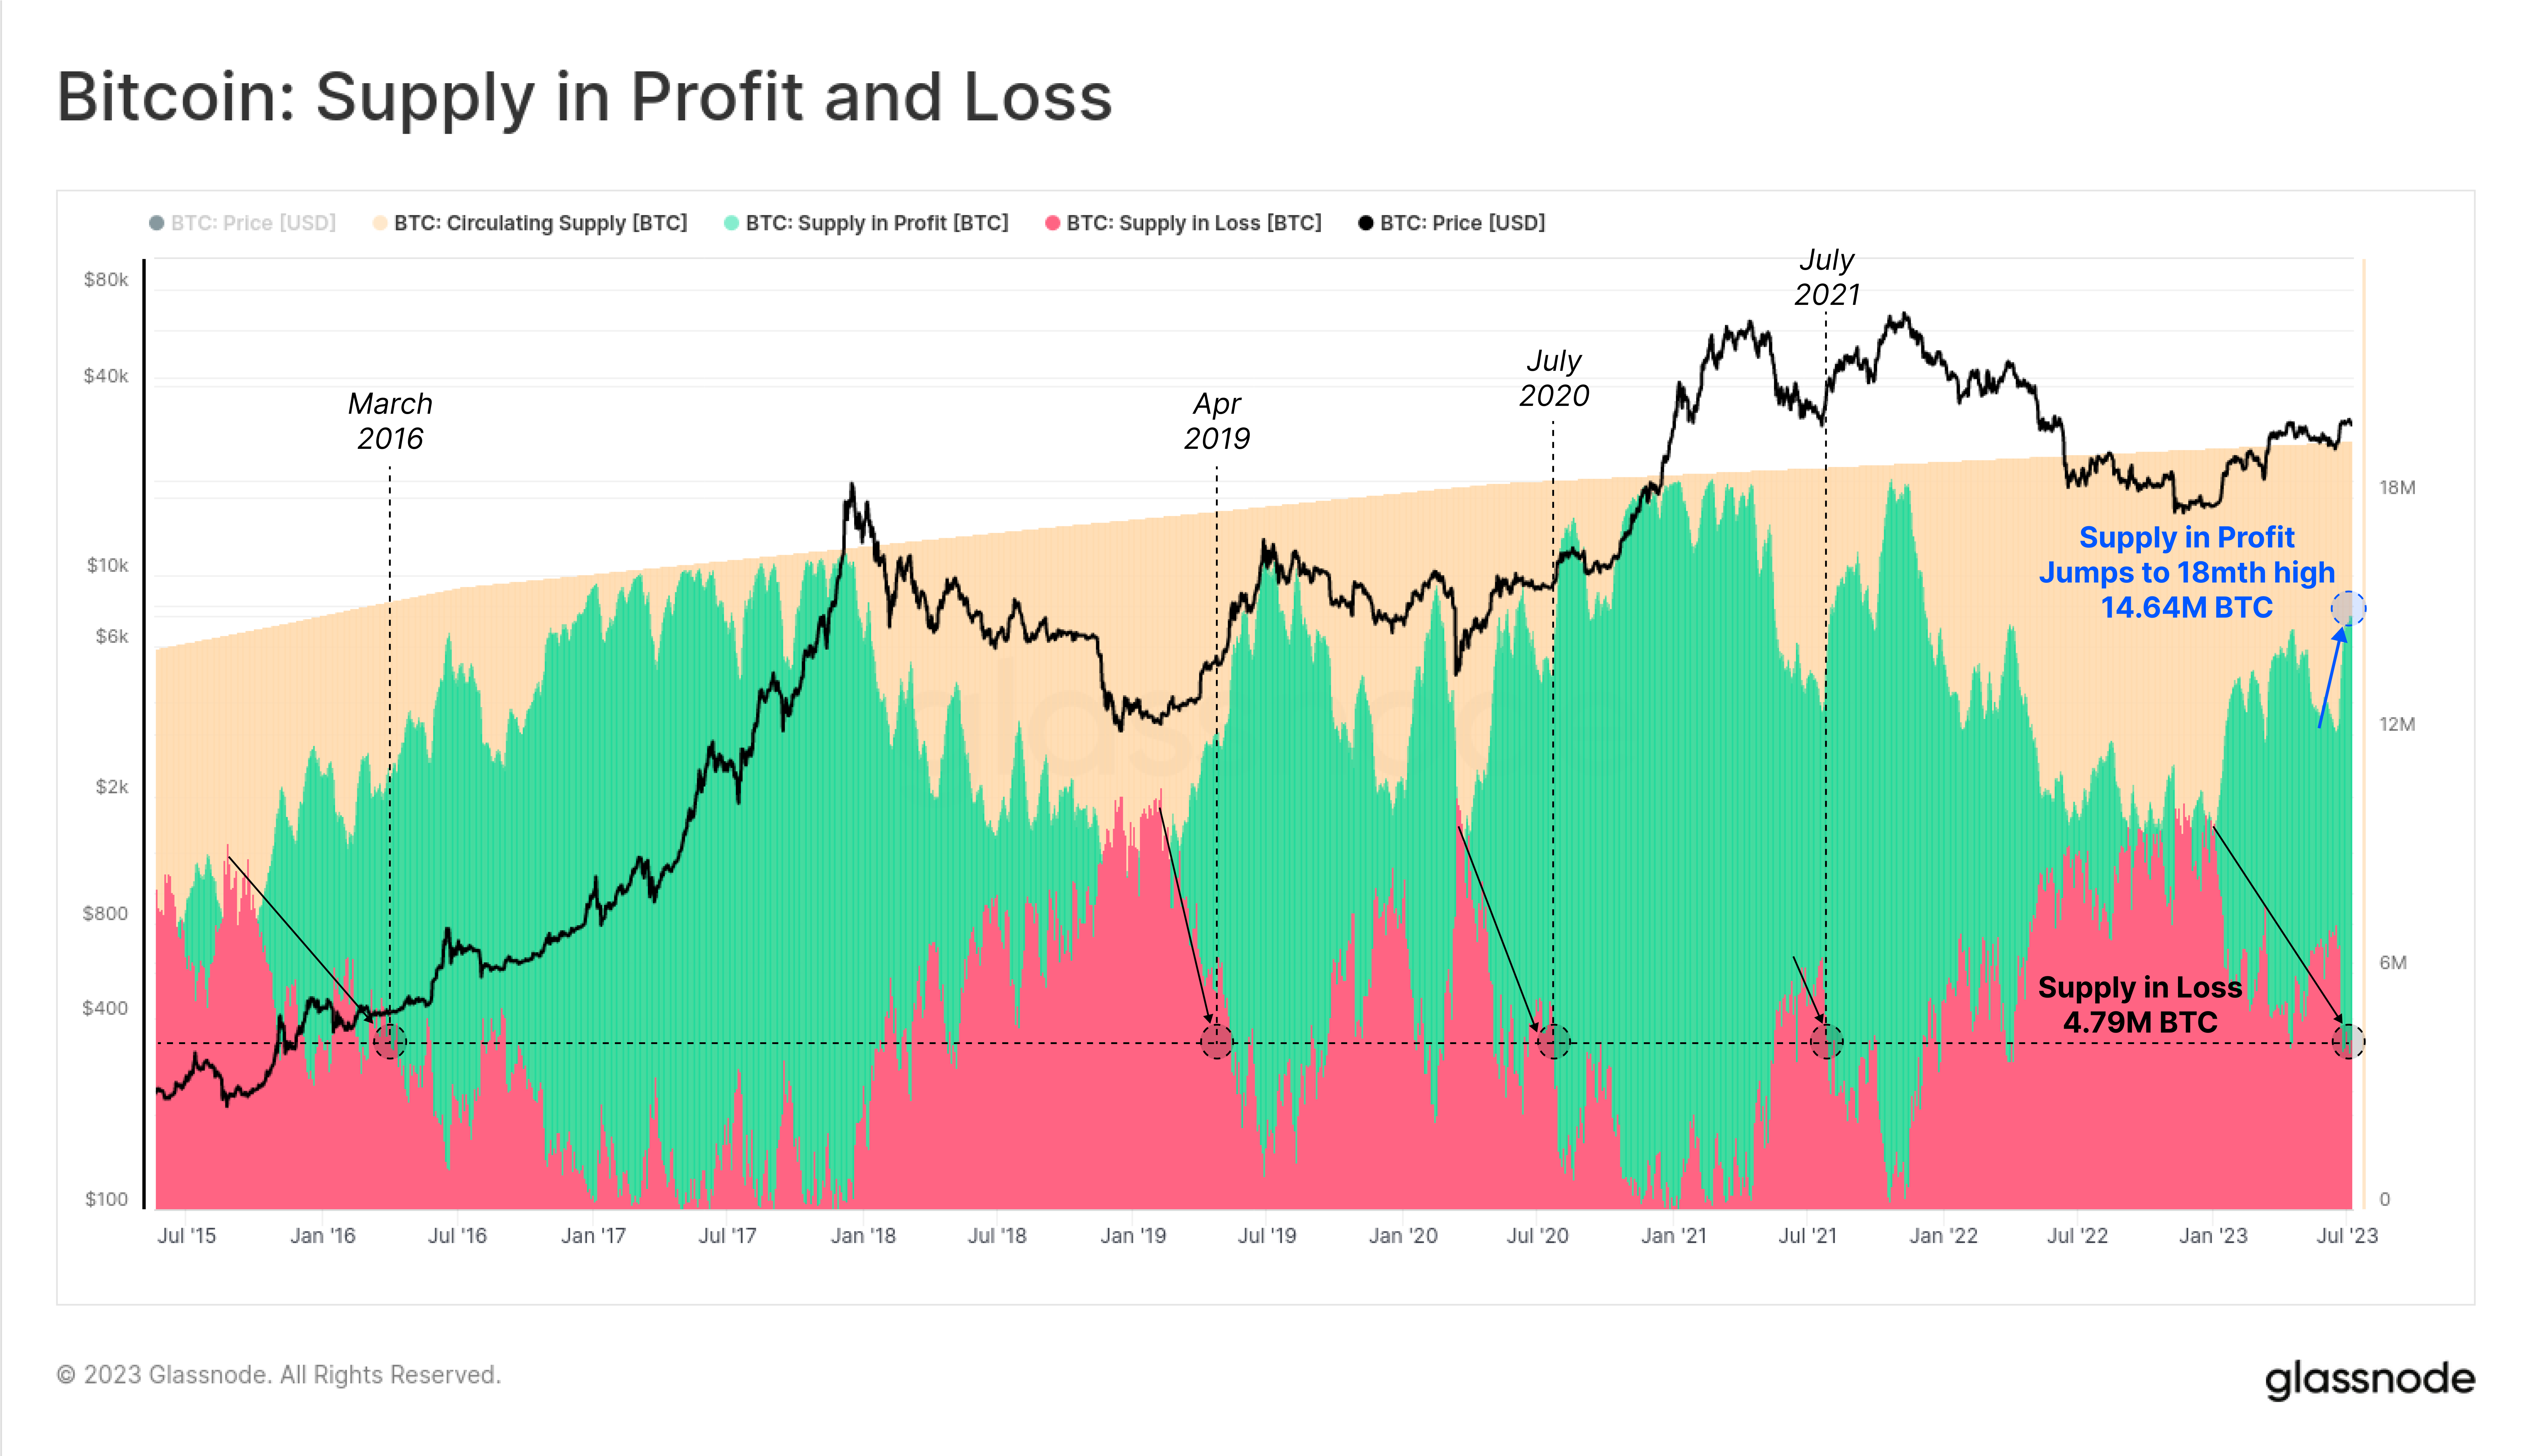 Bitcoin supply in profit and loss | Source: Glassnode